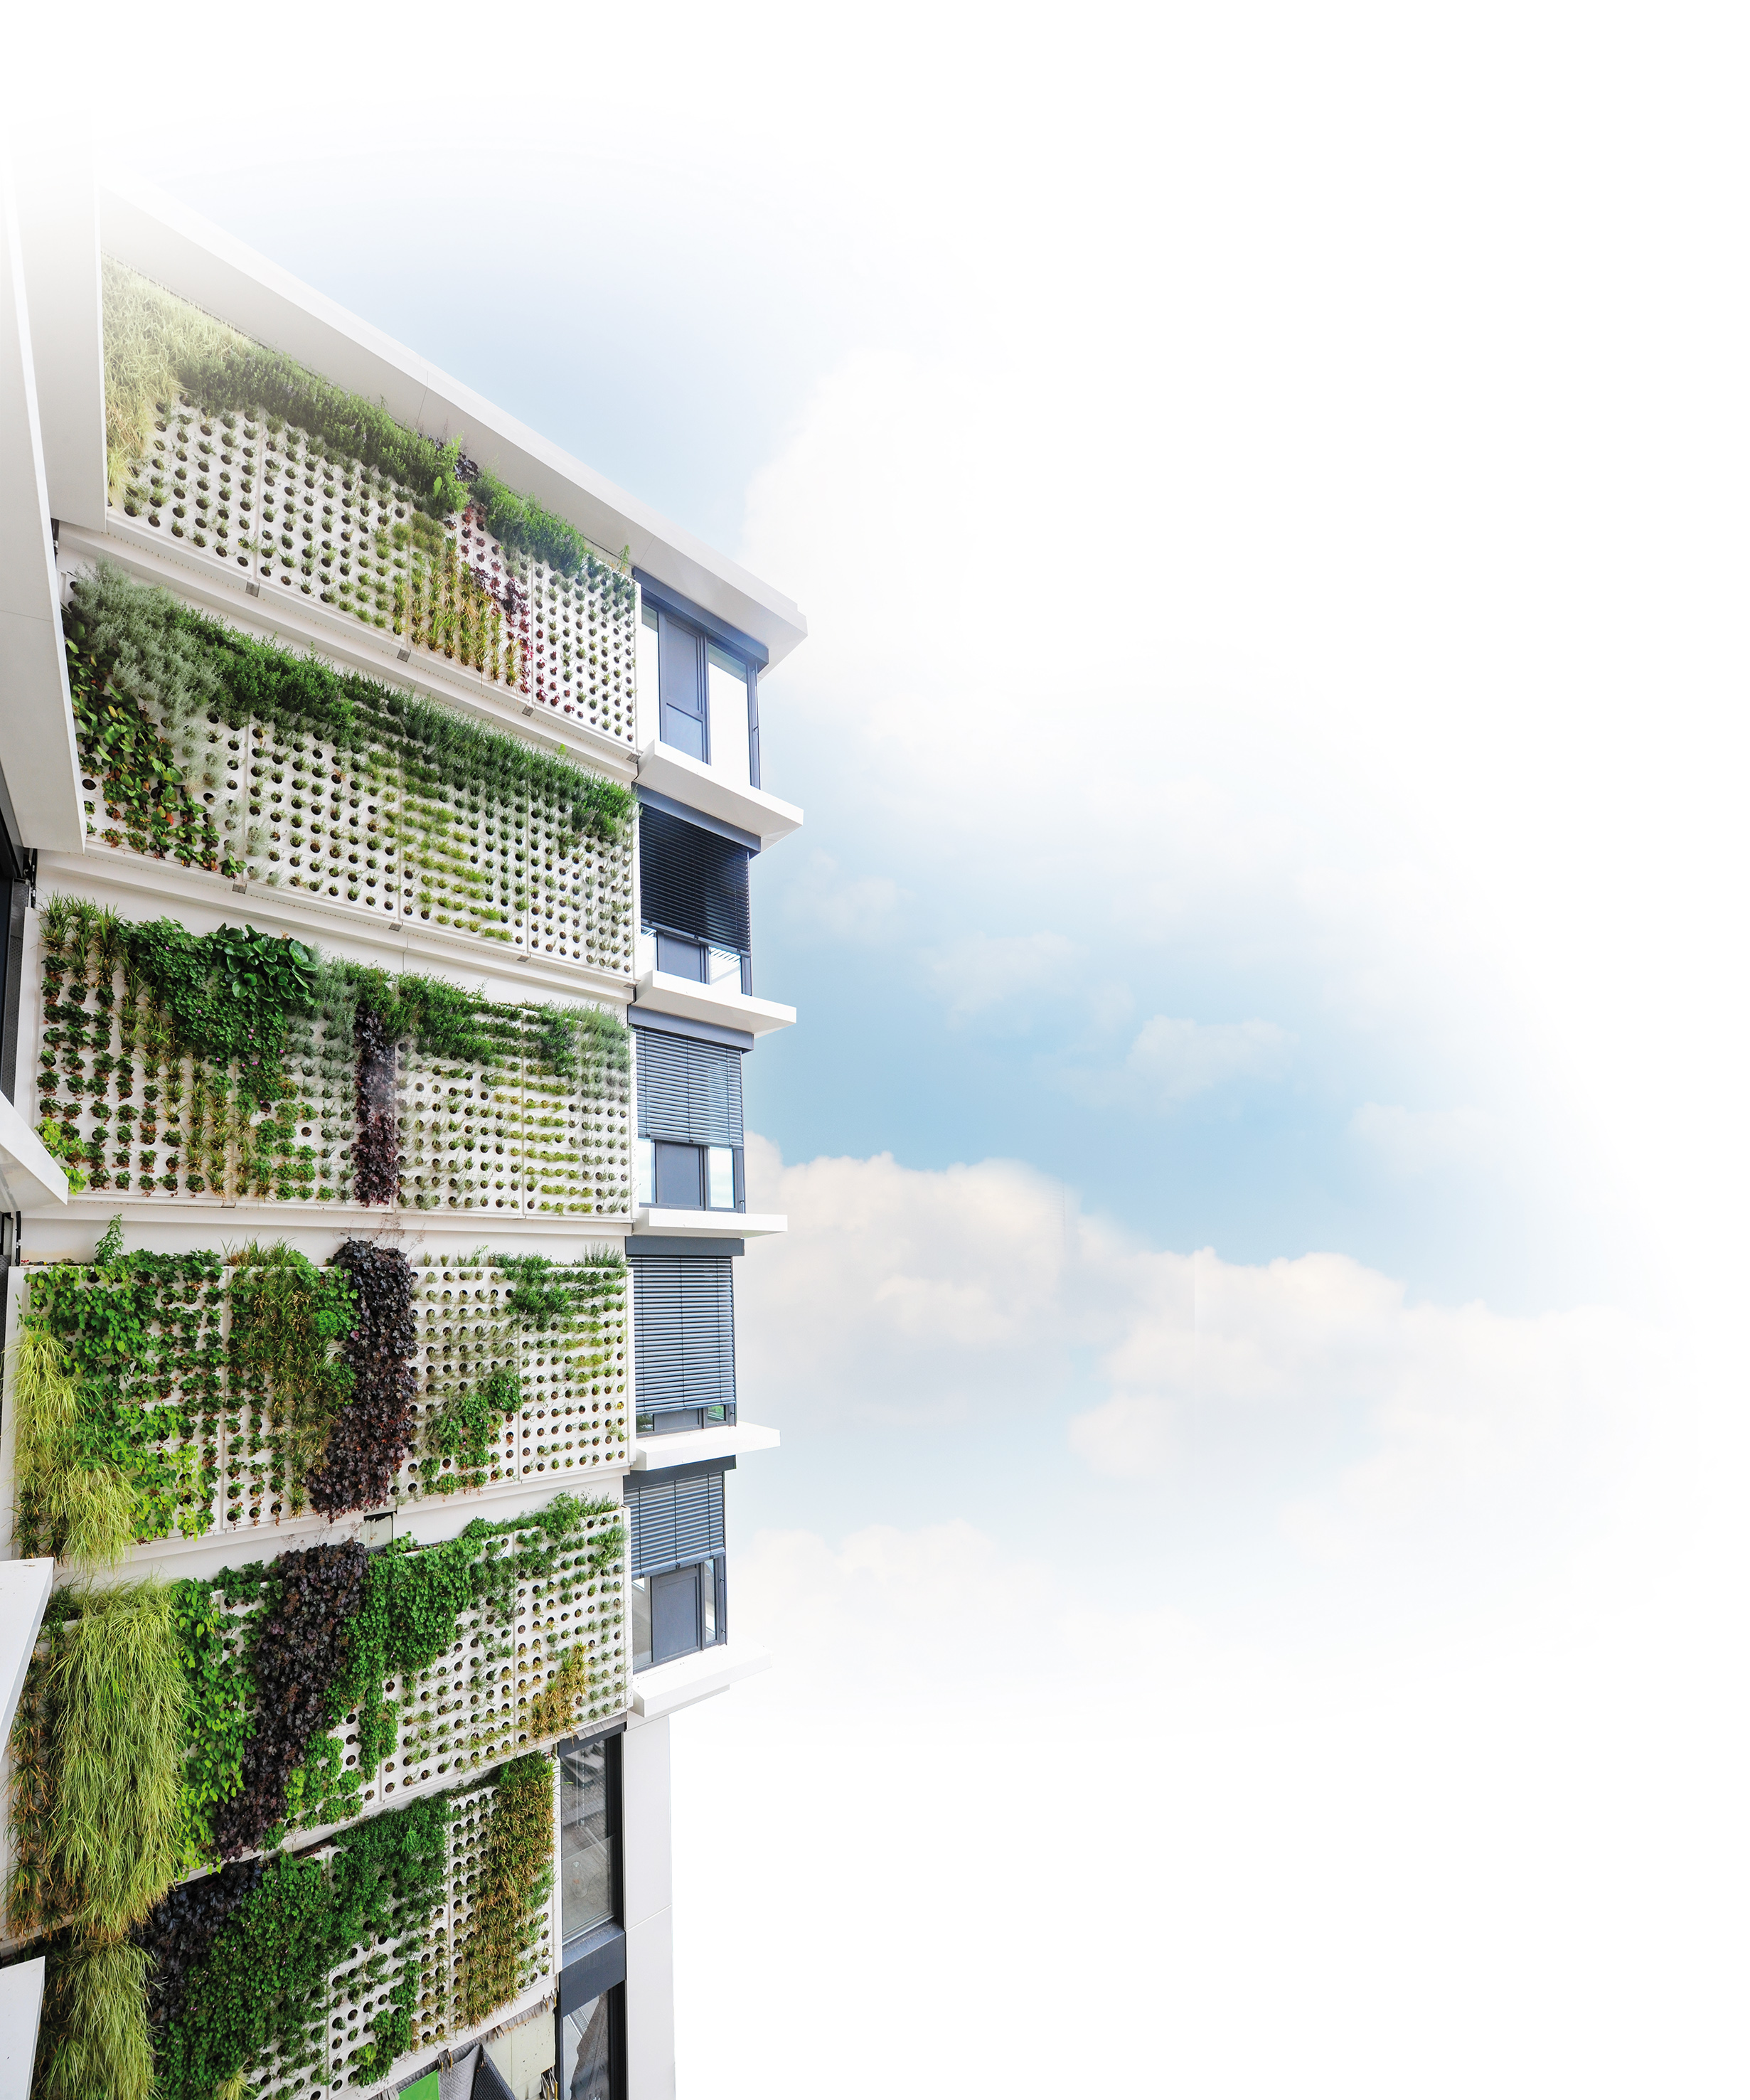 With its new Adam living wall, the company Richard Brink now provides a solution for large-scale façade planting.